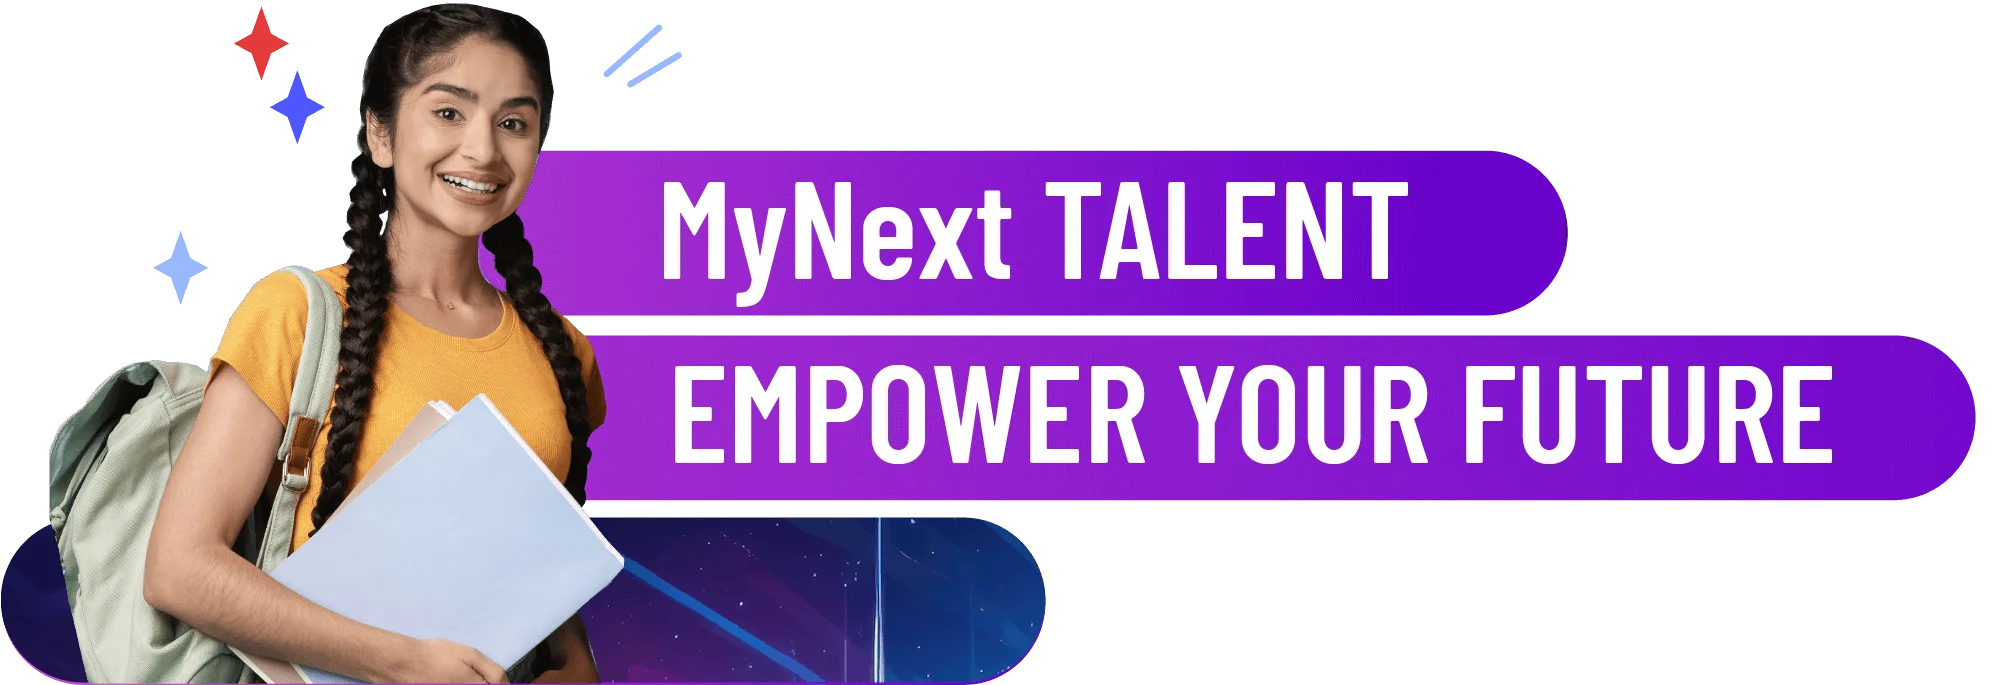 MyNext Talent: Empower your future's image